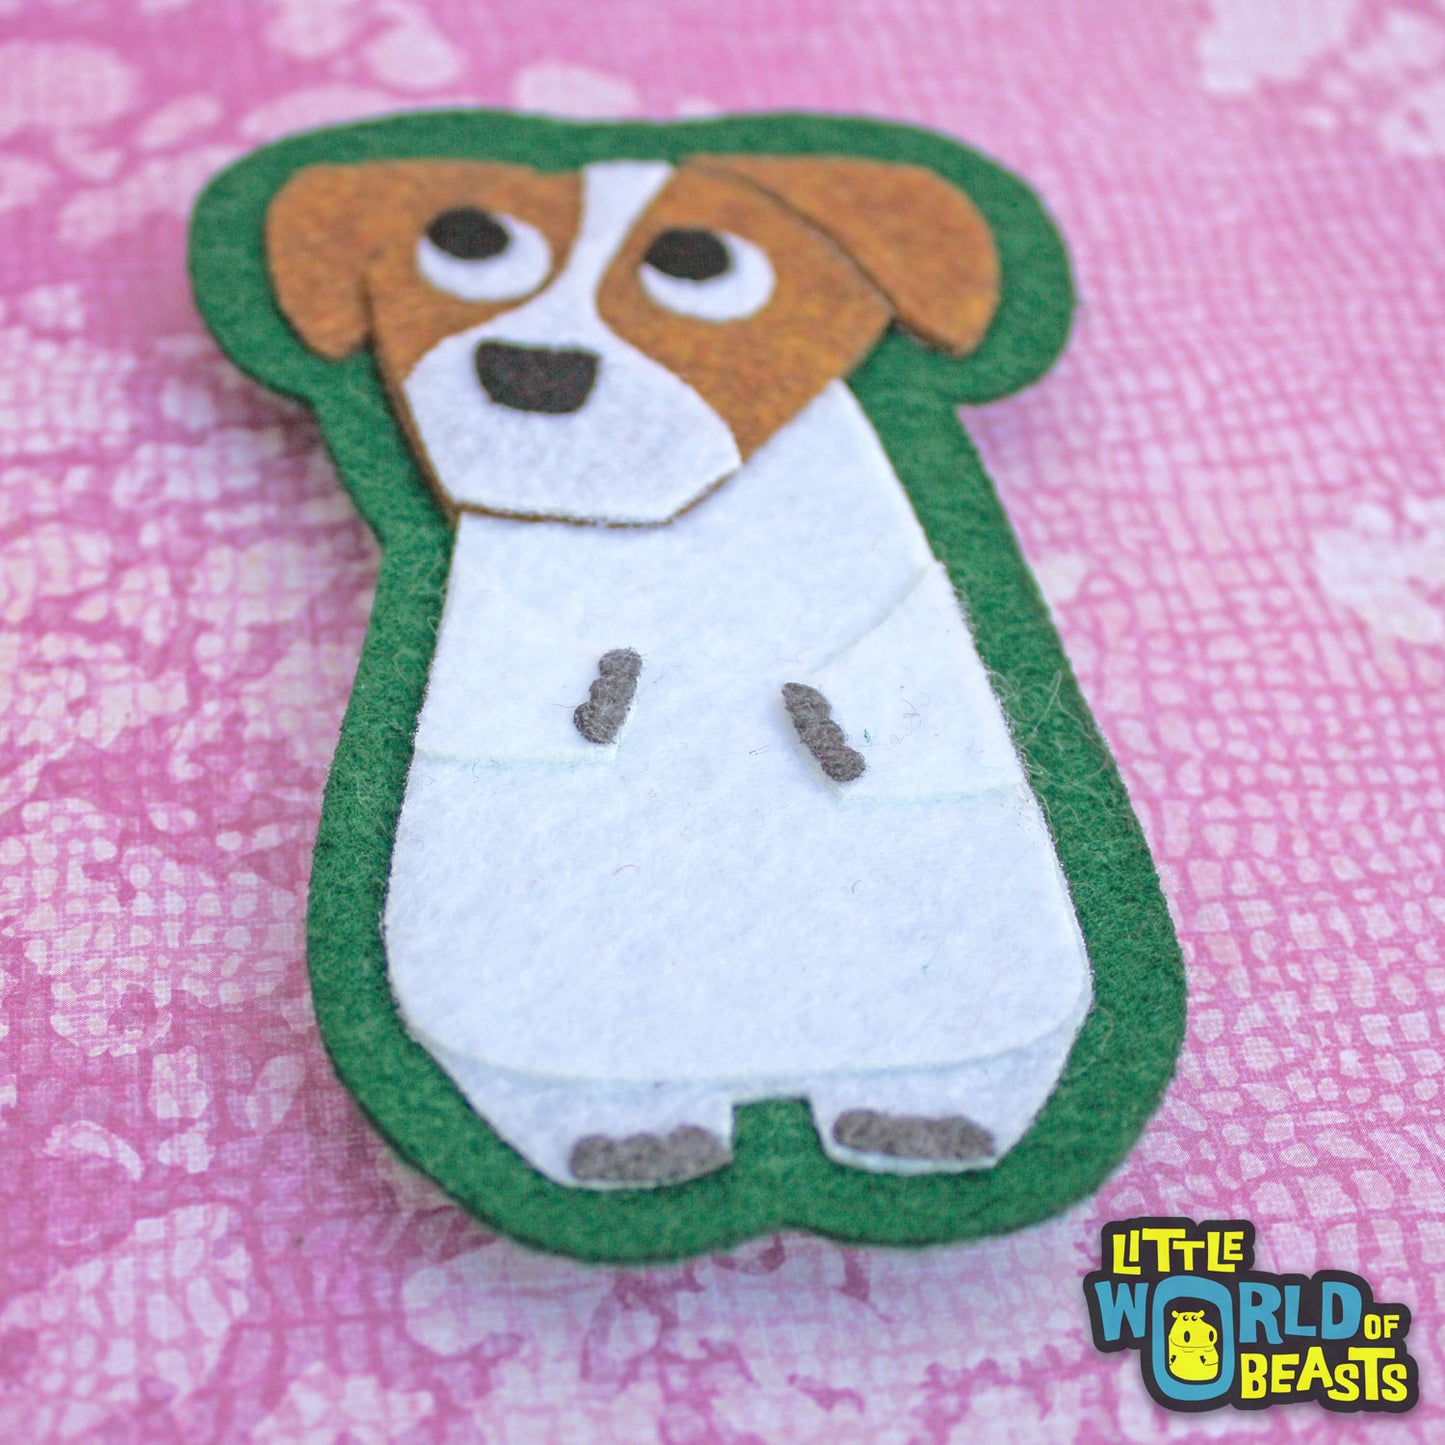 Chip the Jack Russell Sew On or Iron On Patch